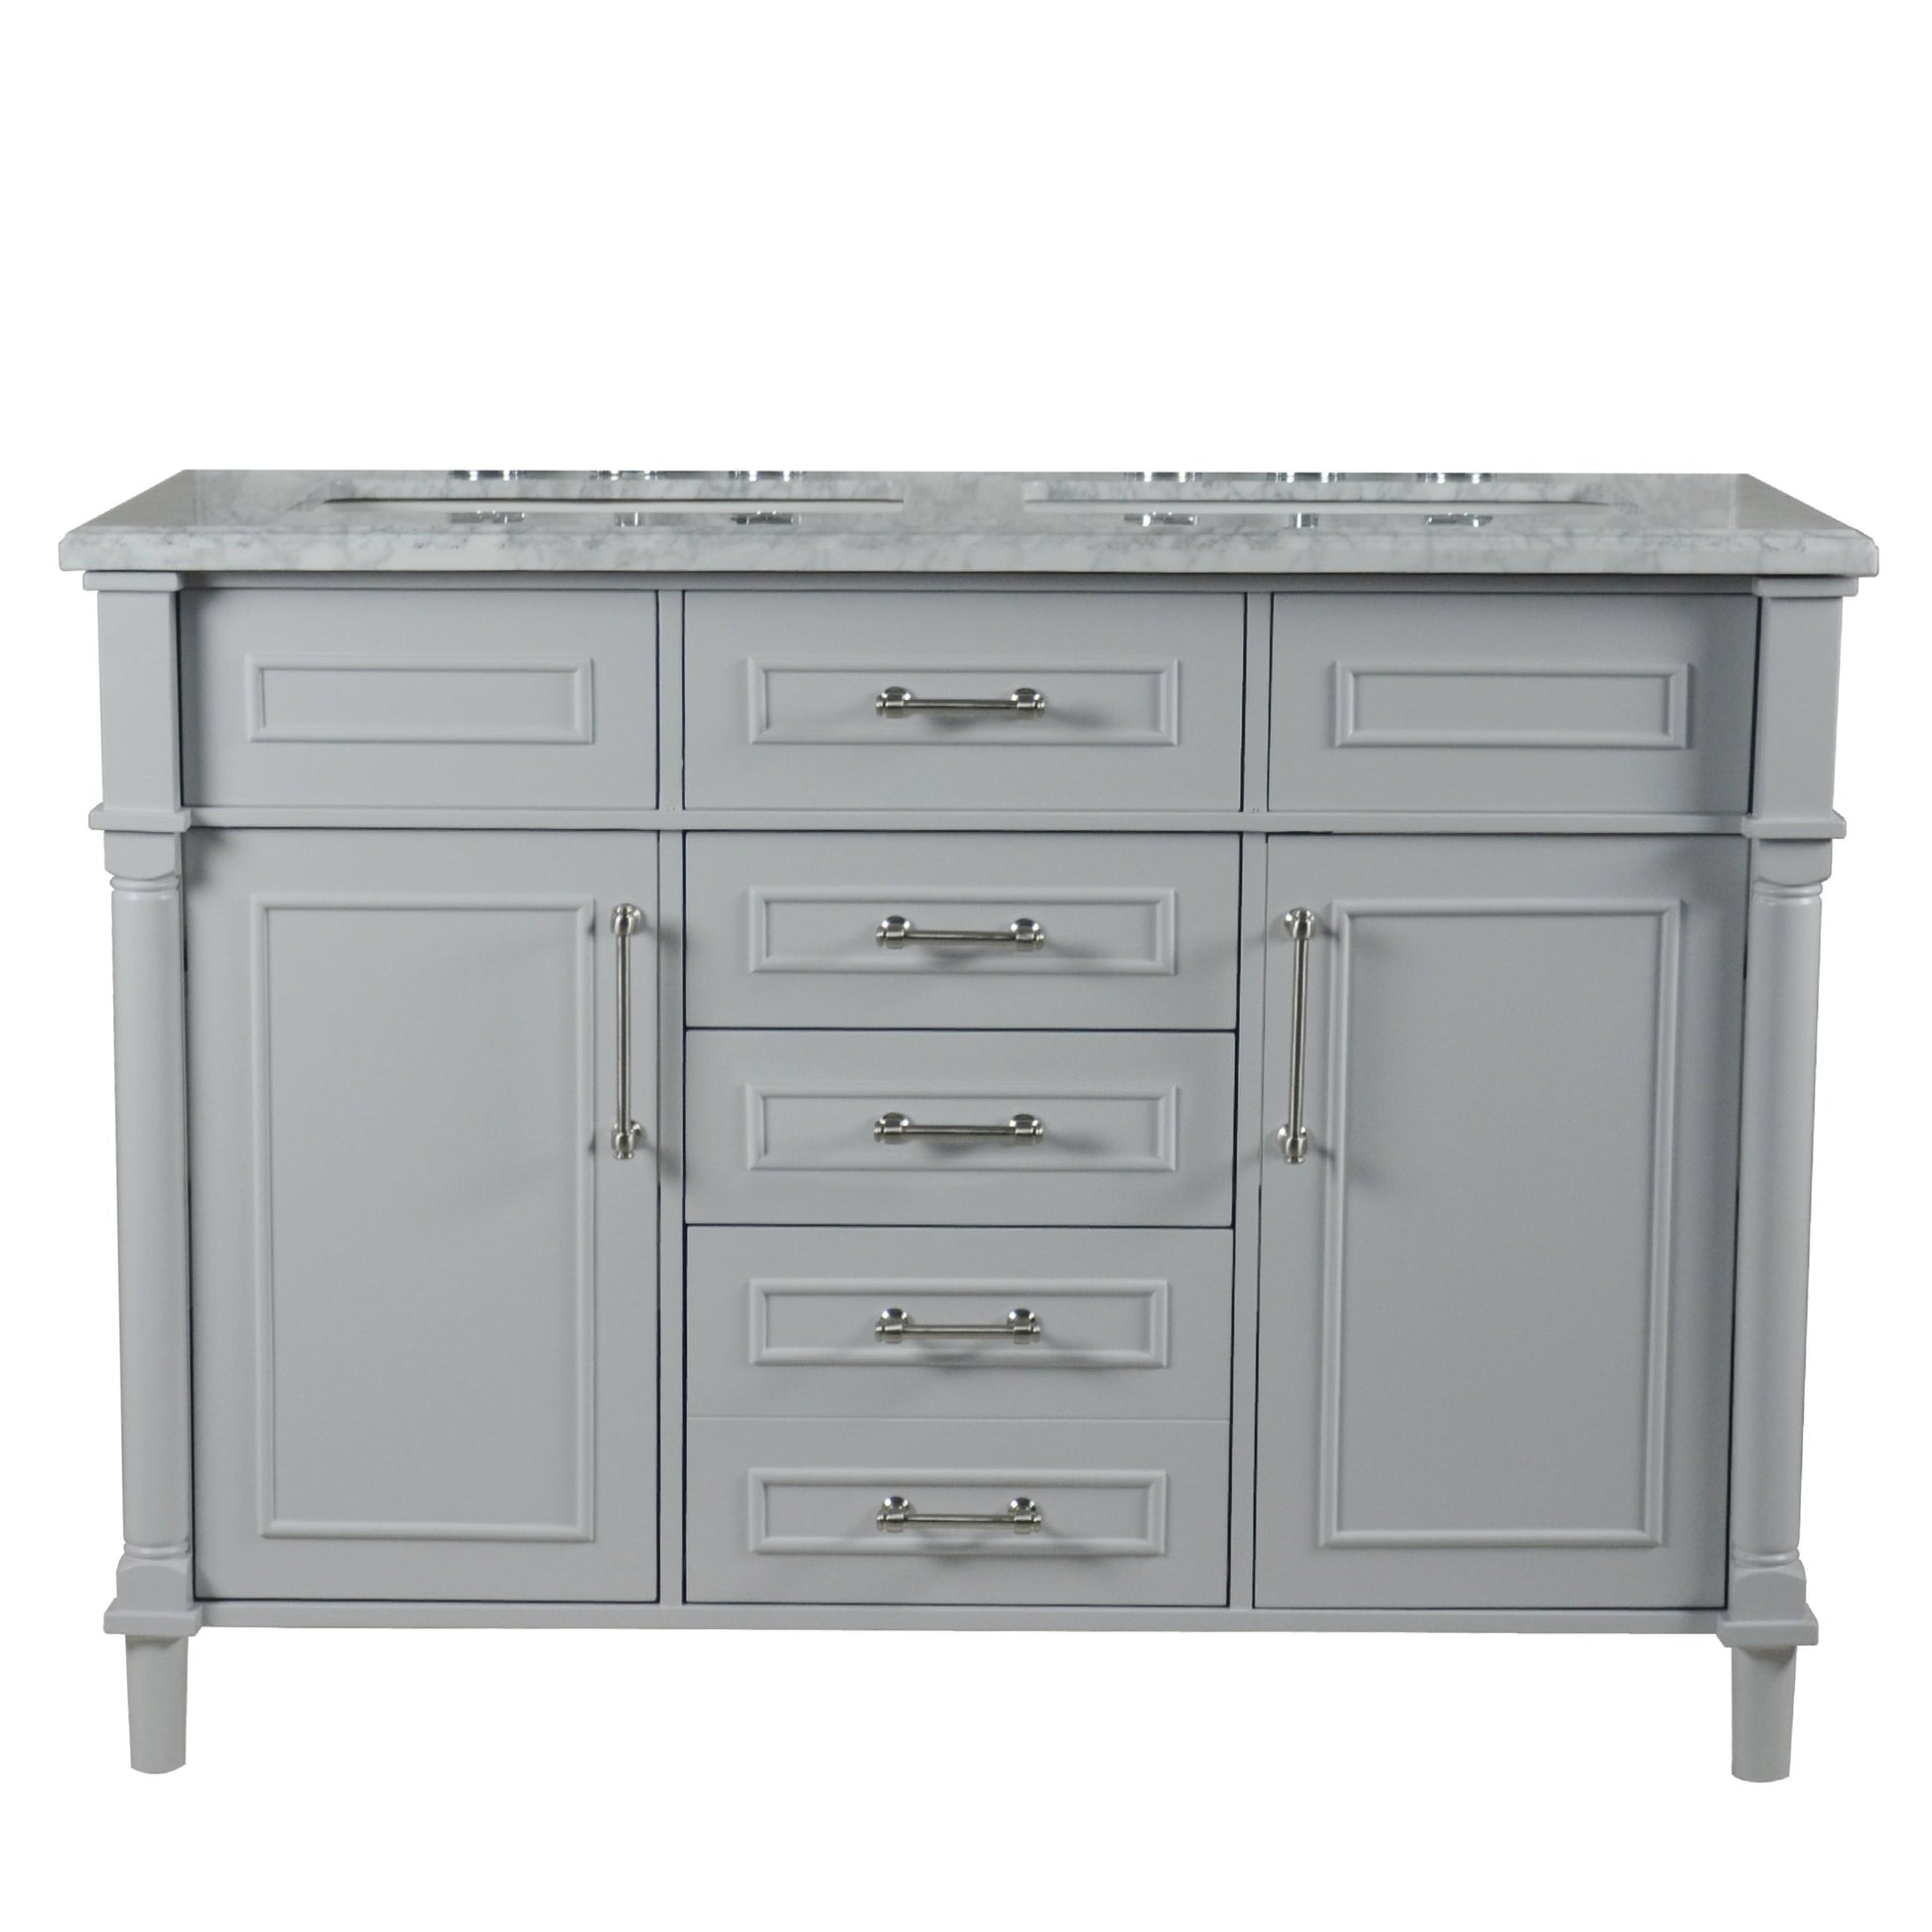 Bellaterra Home Napa 48" 2-Door 4-Drawer Gray Freestanding Vanity Set With Ceramic Double Undermount Rectangular Sink and White Carrara Marble Top, and Brushed Nickel Hardware